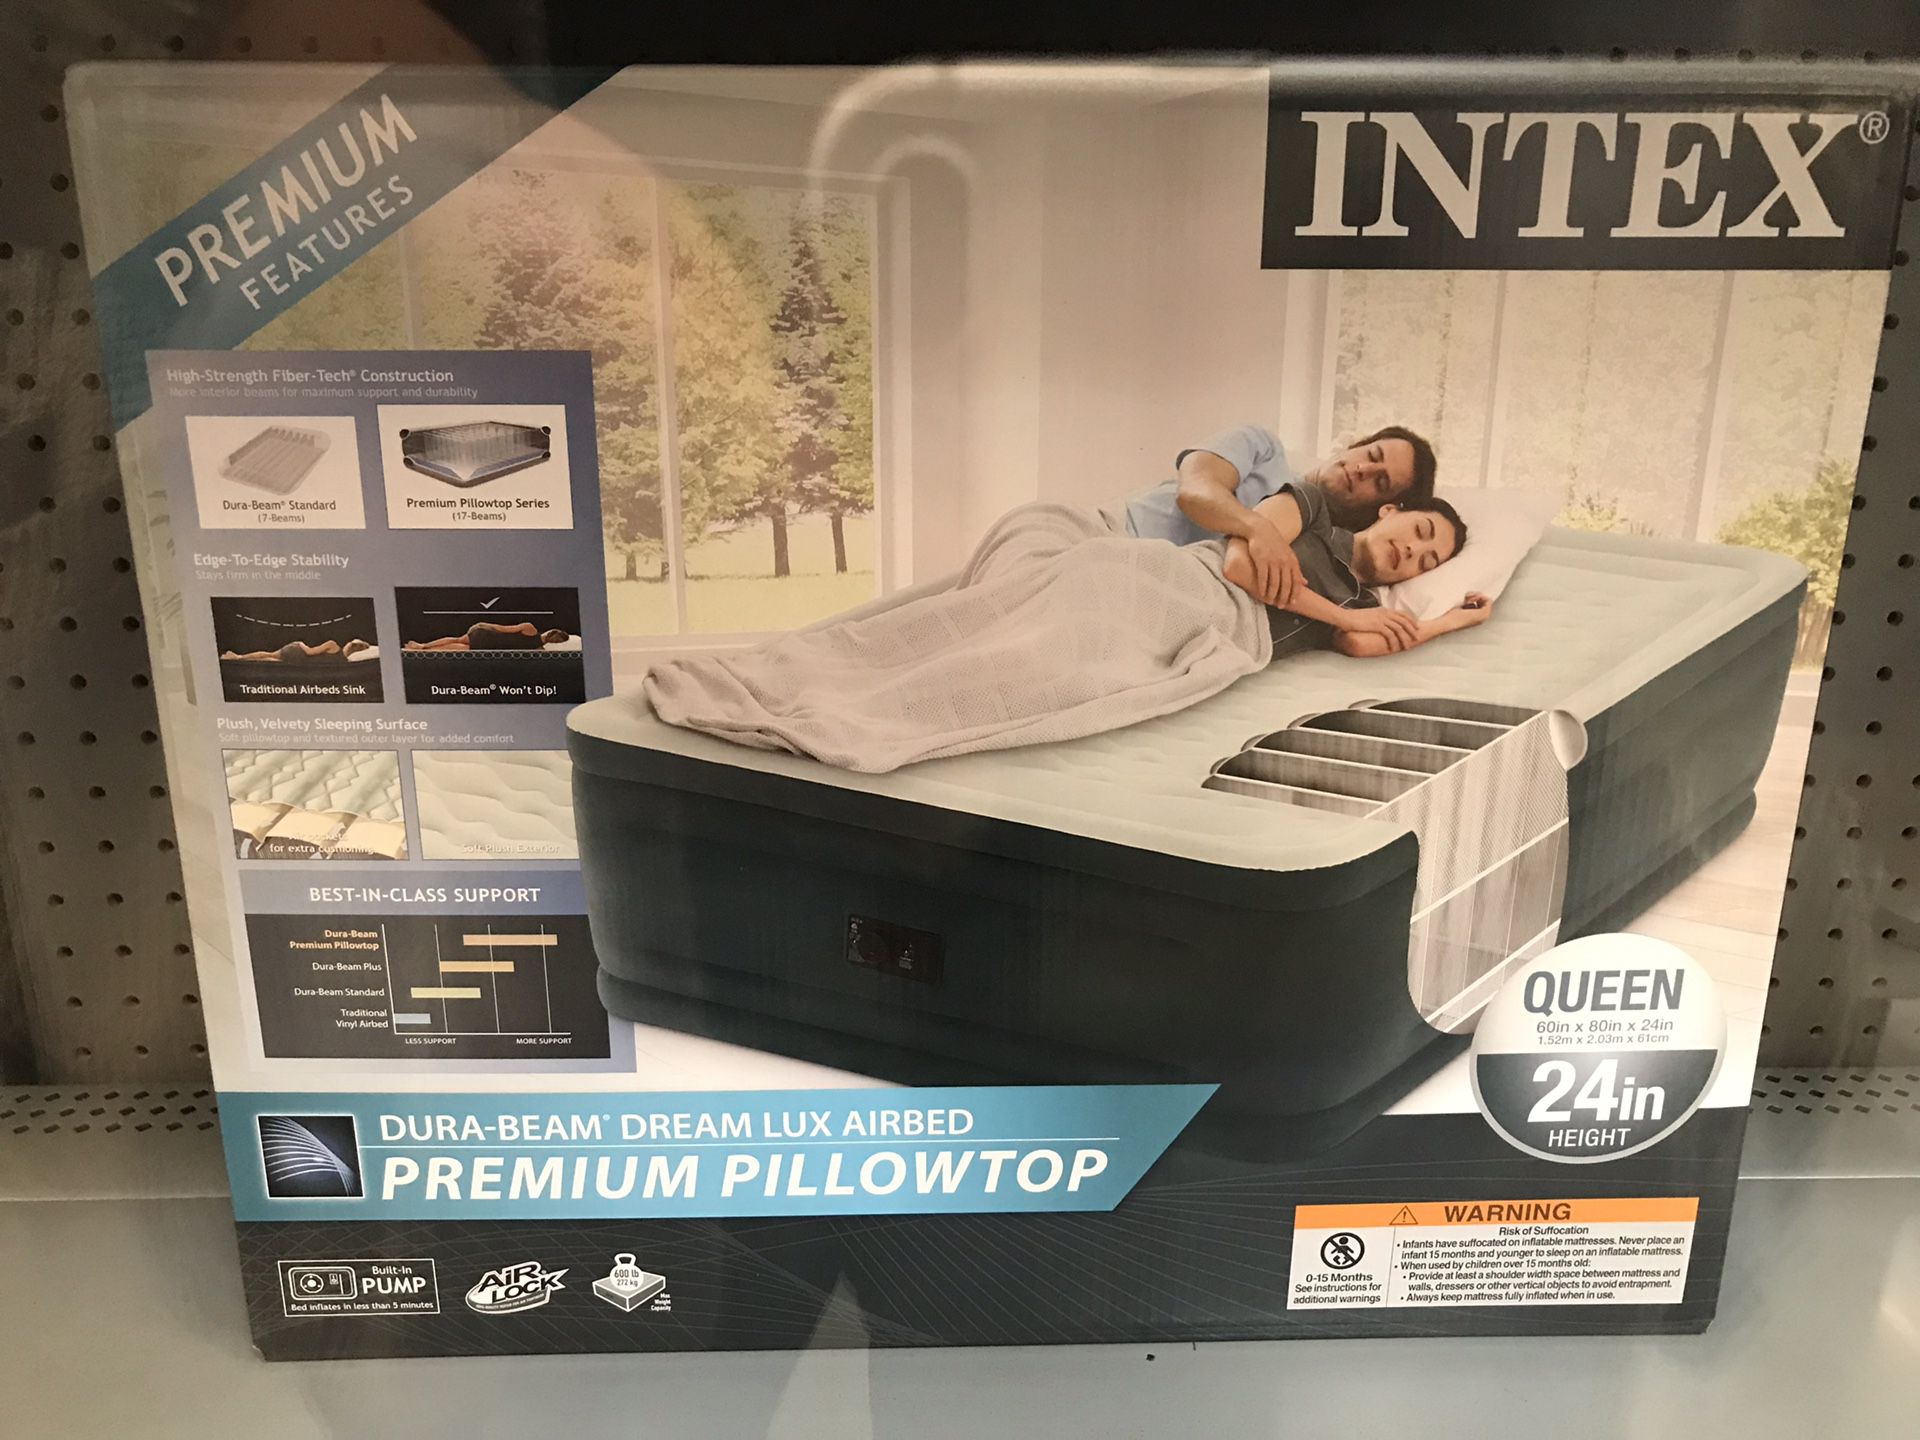 Intex queen air mattress still in box never used. Never opened. Asking 70